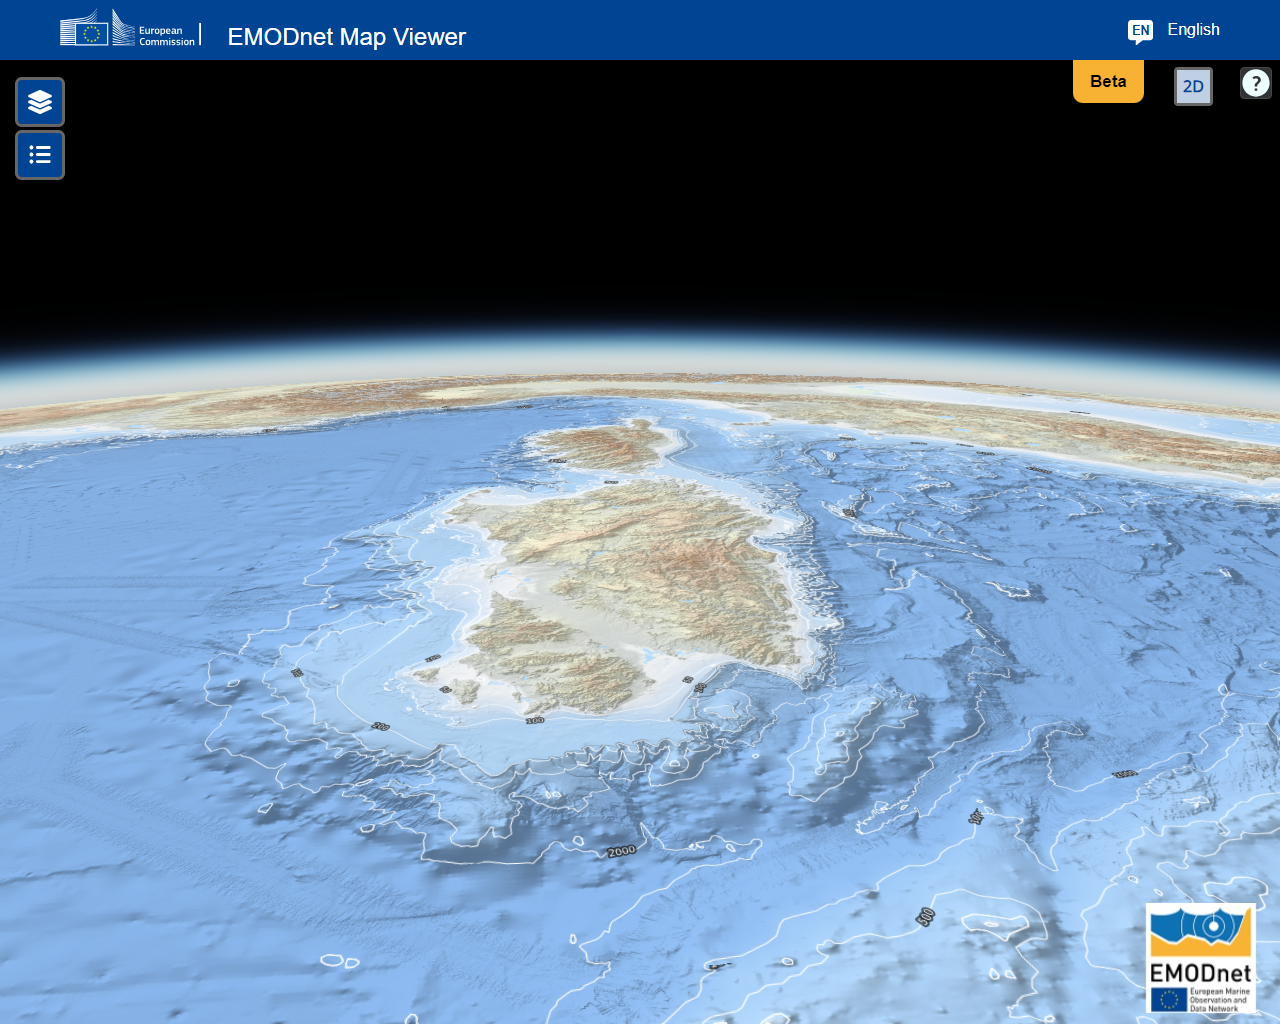 3D bathymetry of the Mesolithic Atlantic Ocean now known as the Mediterranean Sea 4